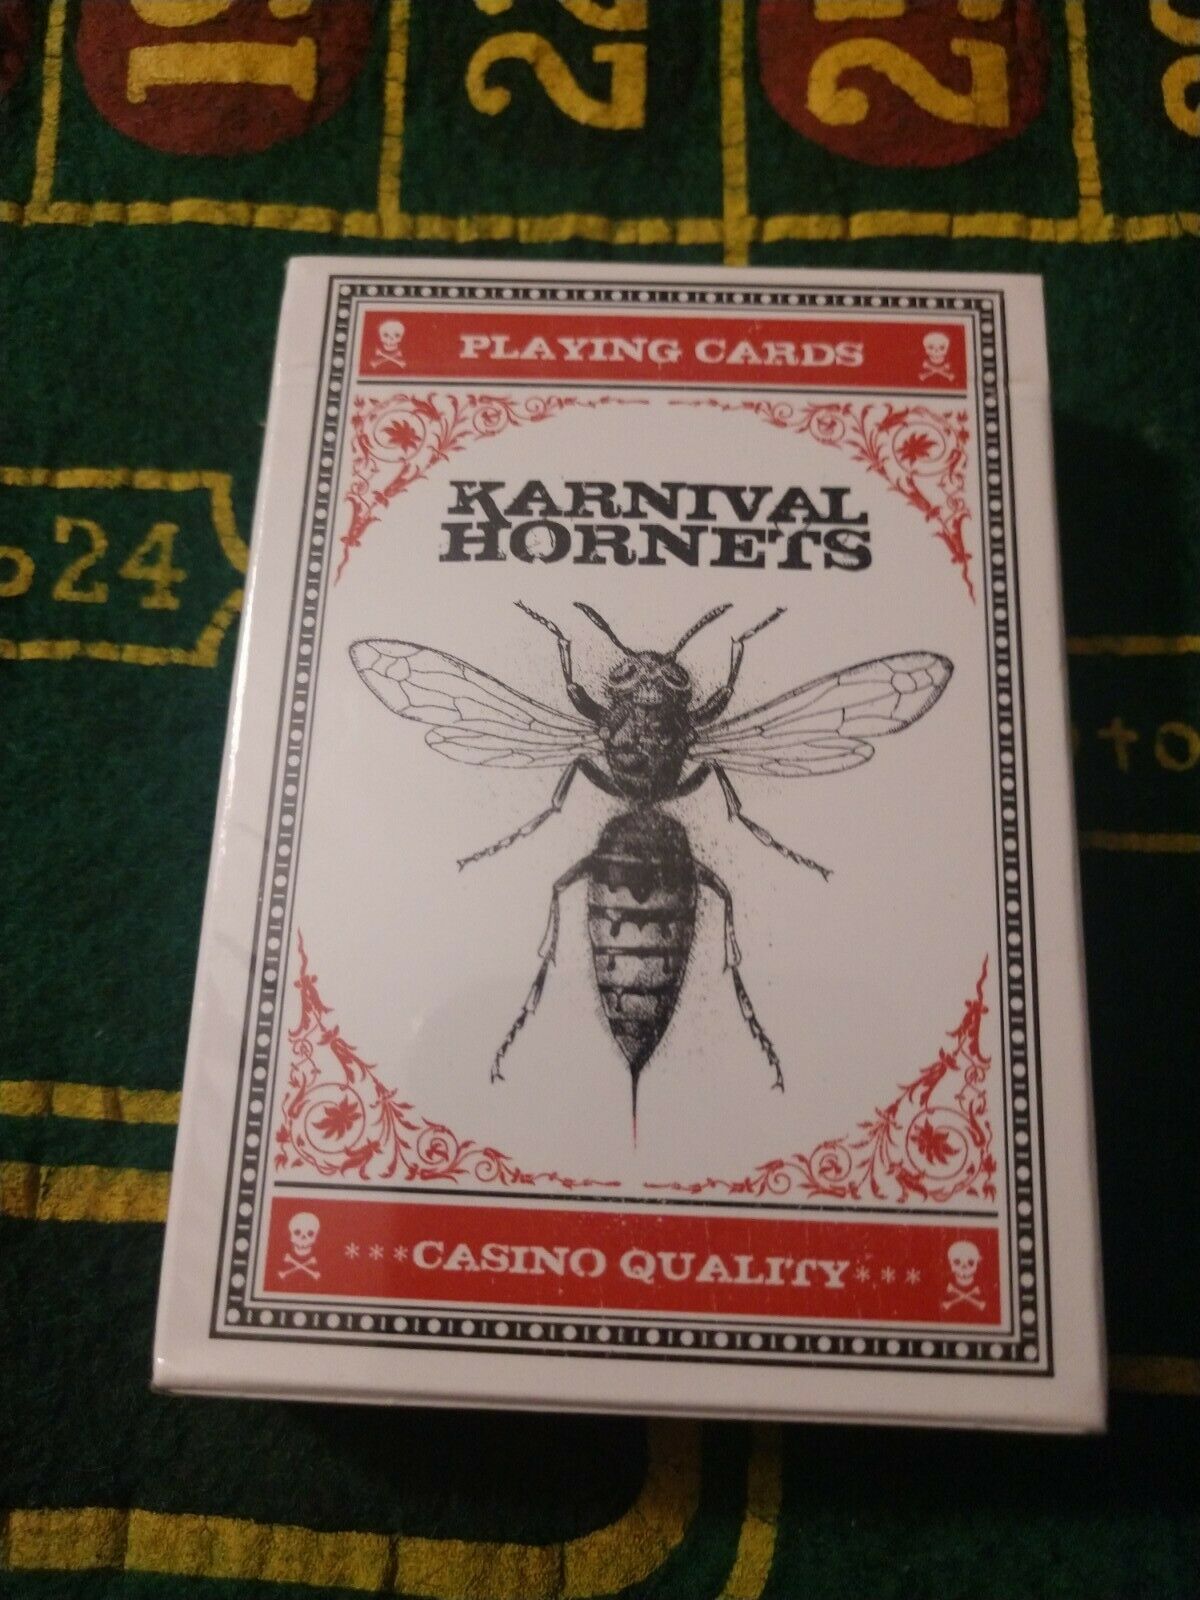 Collectible Playing Cards Karnival Hornets Skull Back Casino Quality Deck Poker